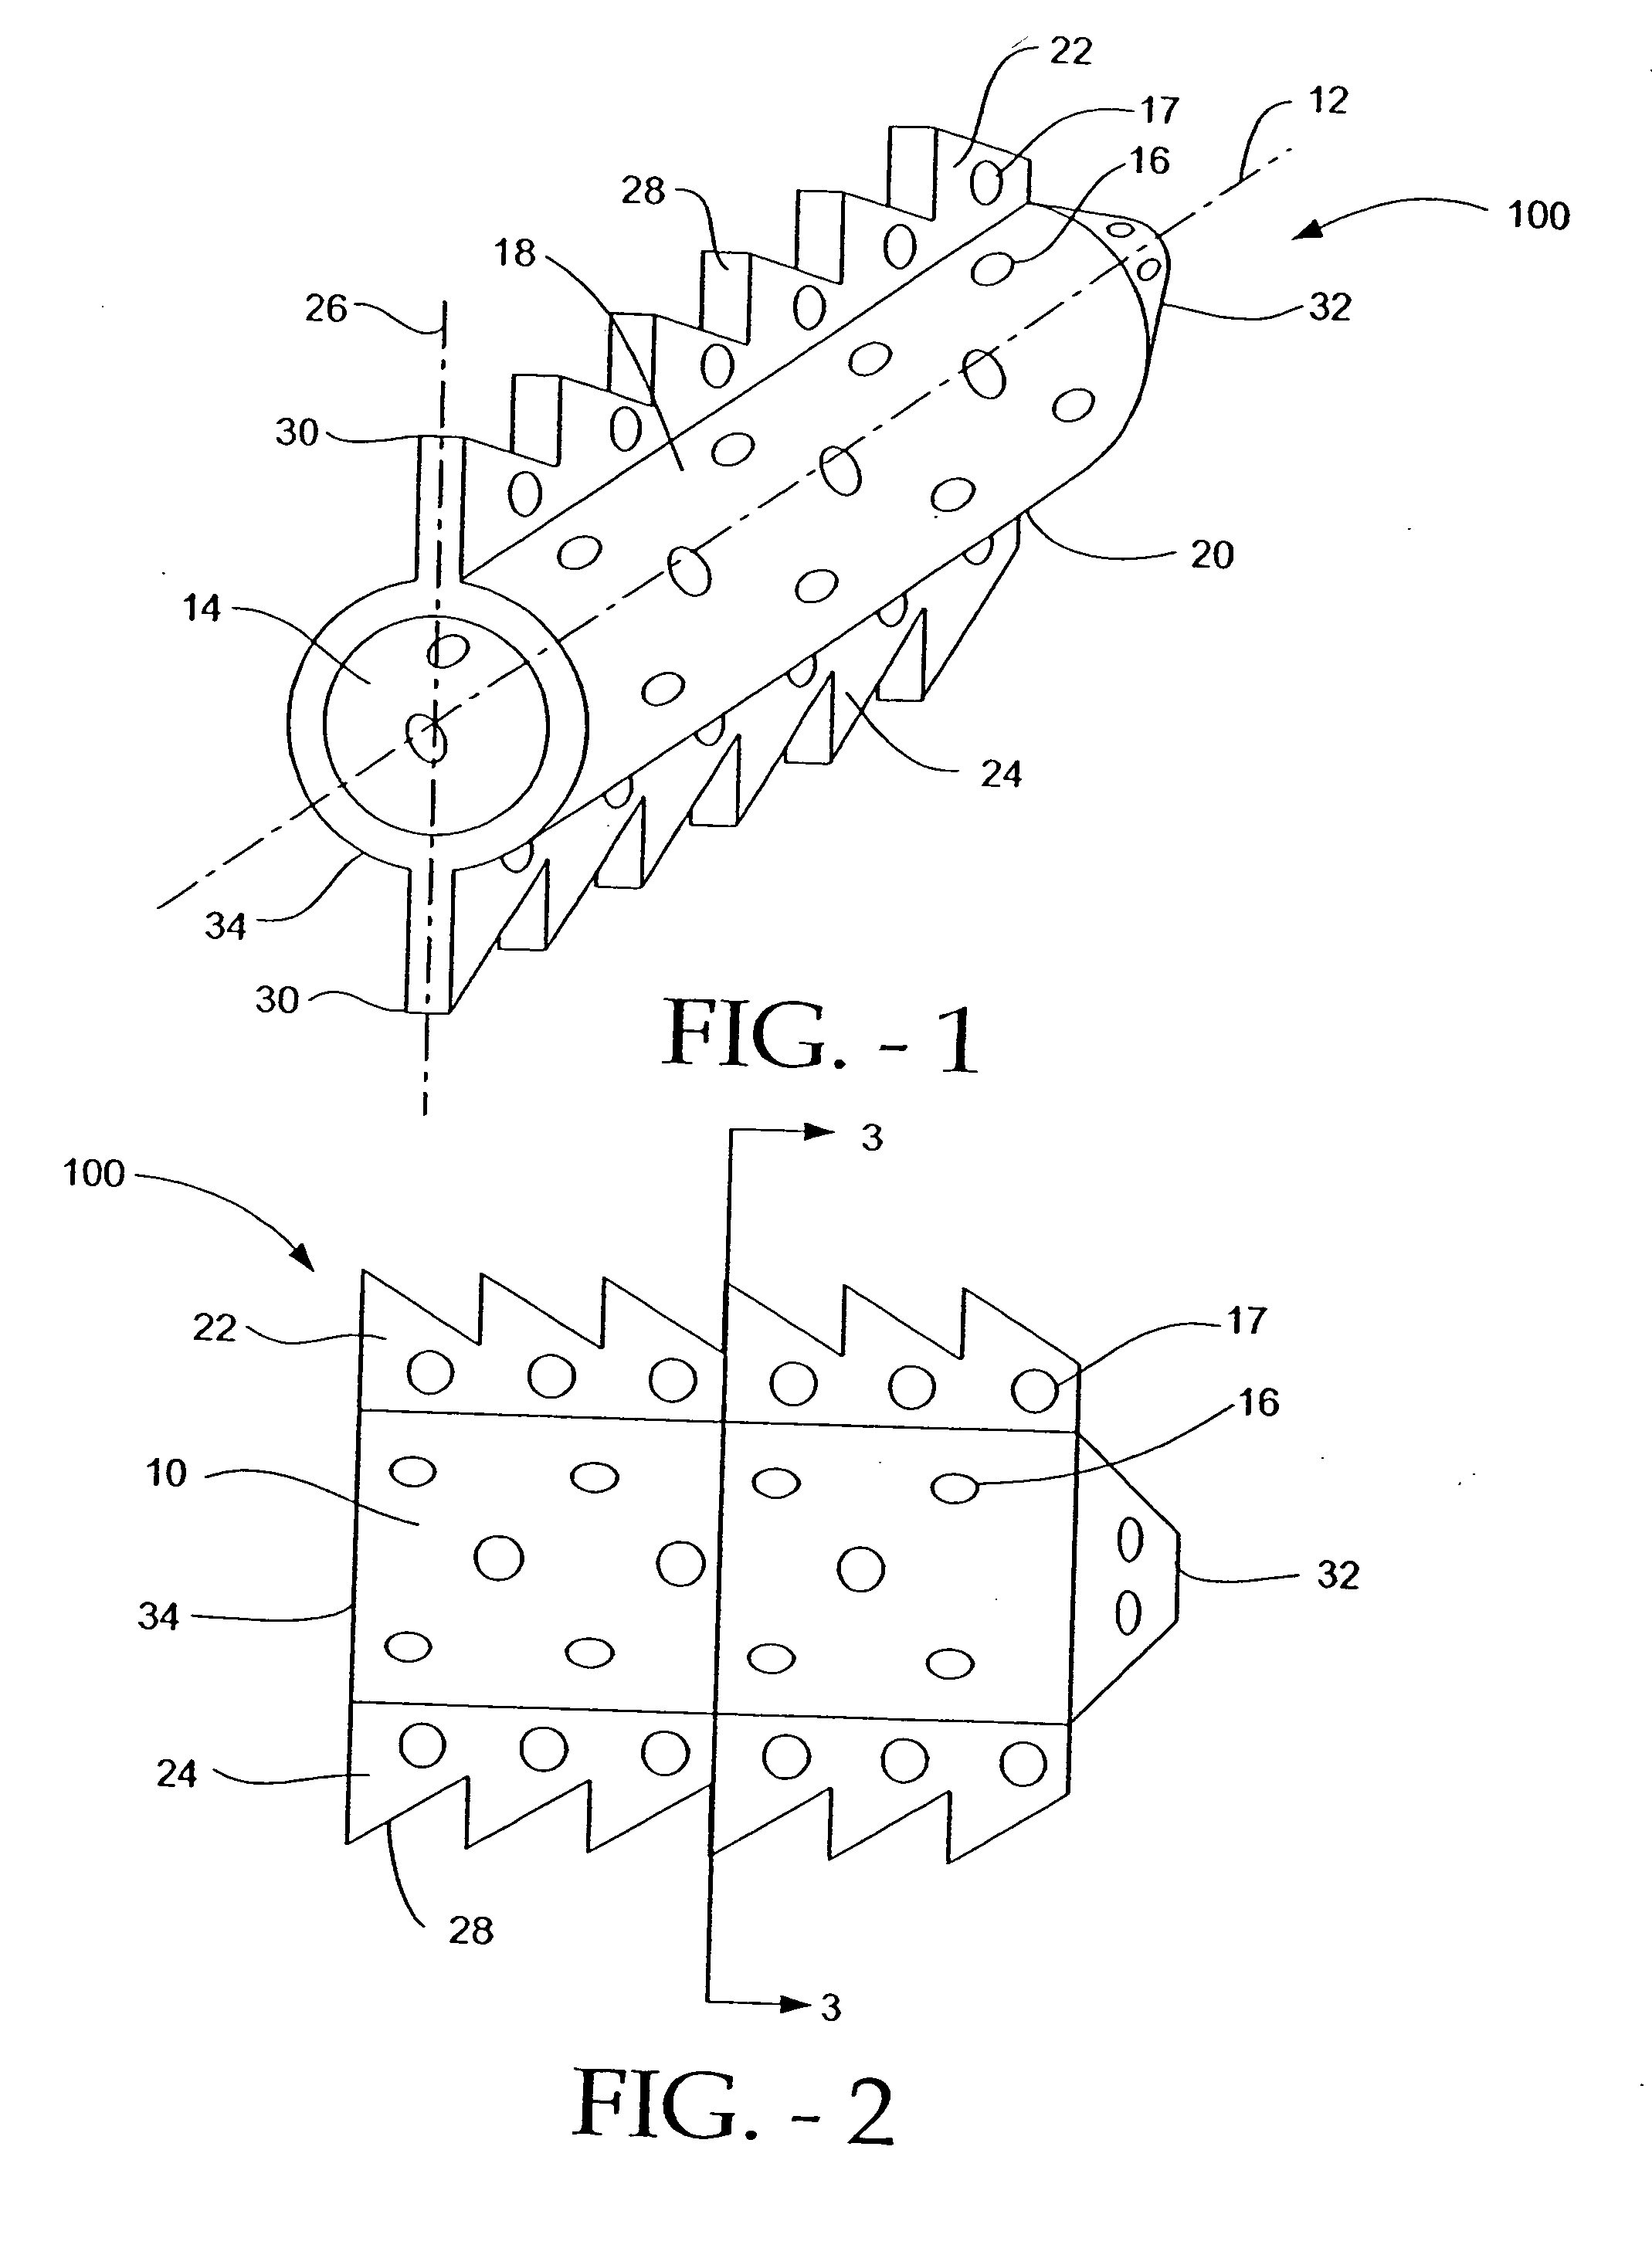 Intervertebral body fusion cage with keels and implantation methods